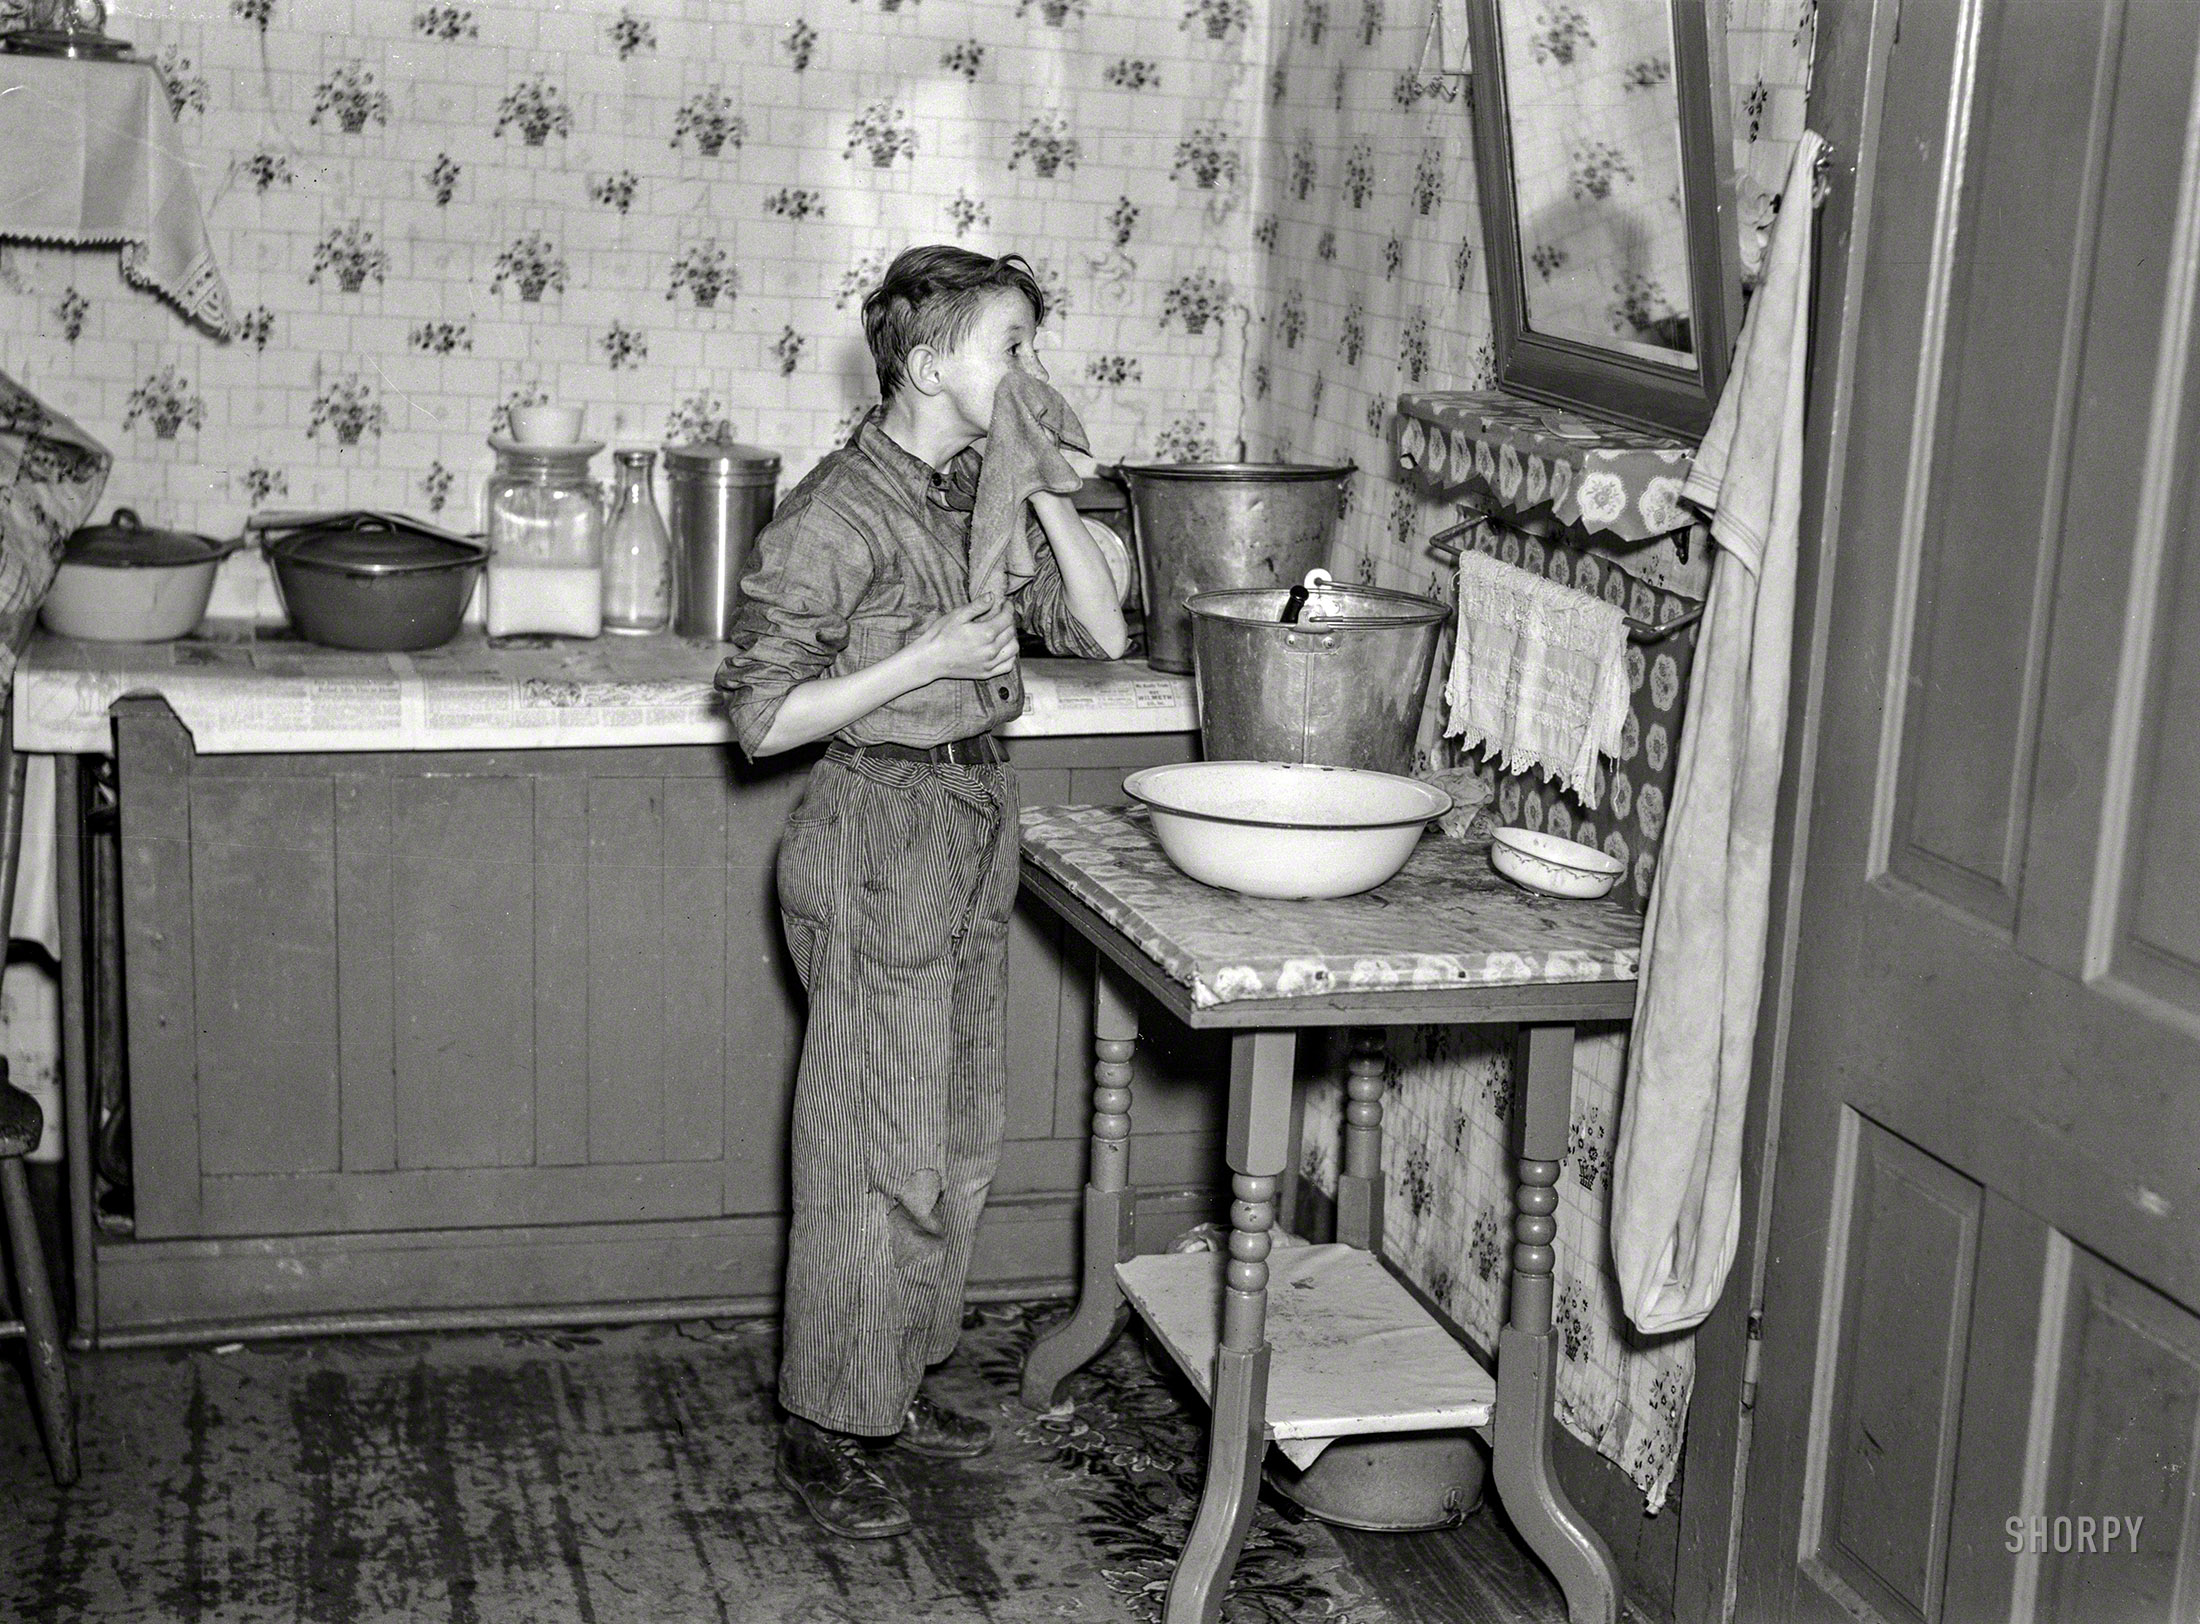 March 1937. "6:45 a.m. -- One of nine children, son of hired man Tip Estes washing his face after doing his early-morning chores. Near Fowler, Indiana." Photo by Russell Lee for the Resettlement Administration. View full size.